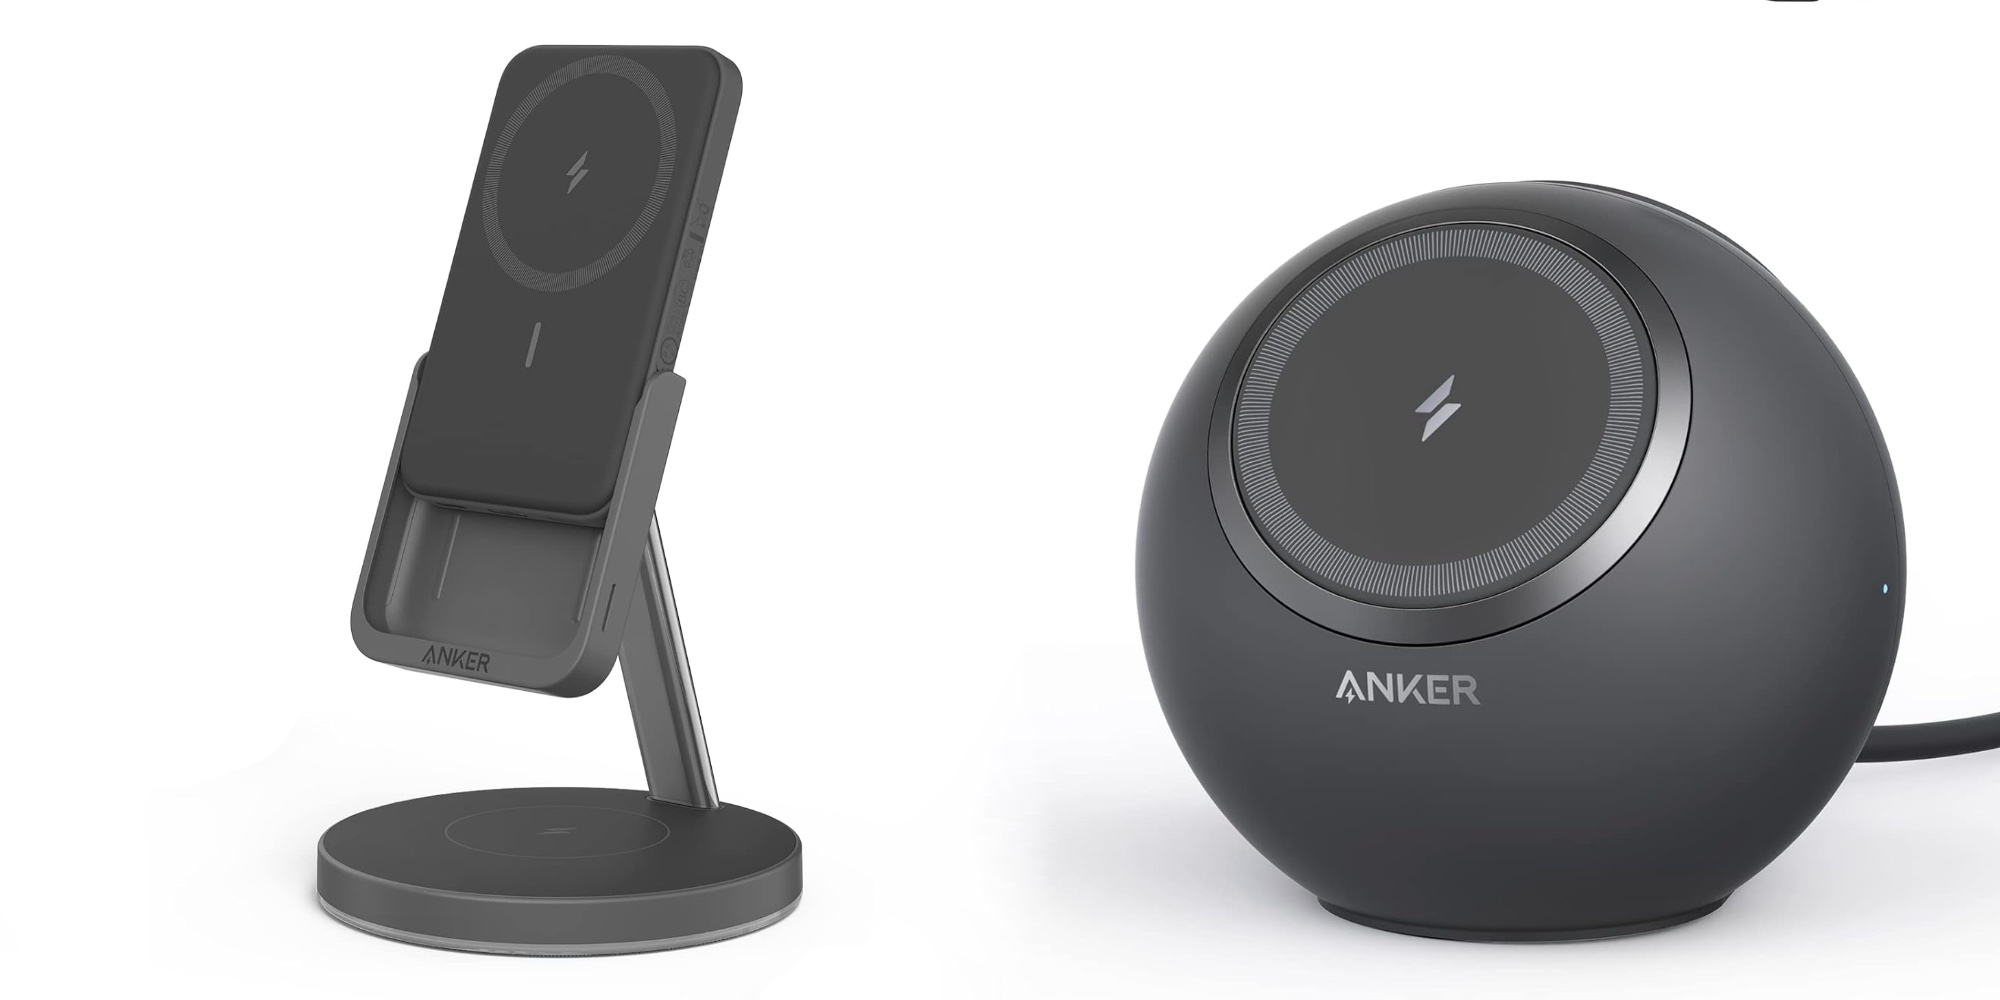 Anker's MagGo 2-in-1 charging stand transforms into a MagSafe